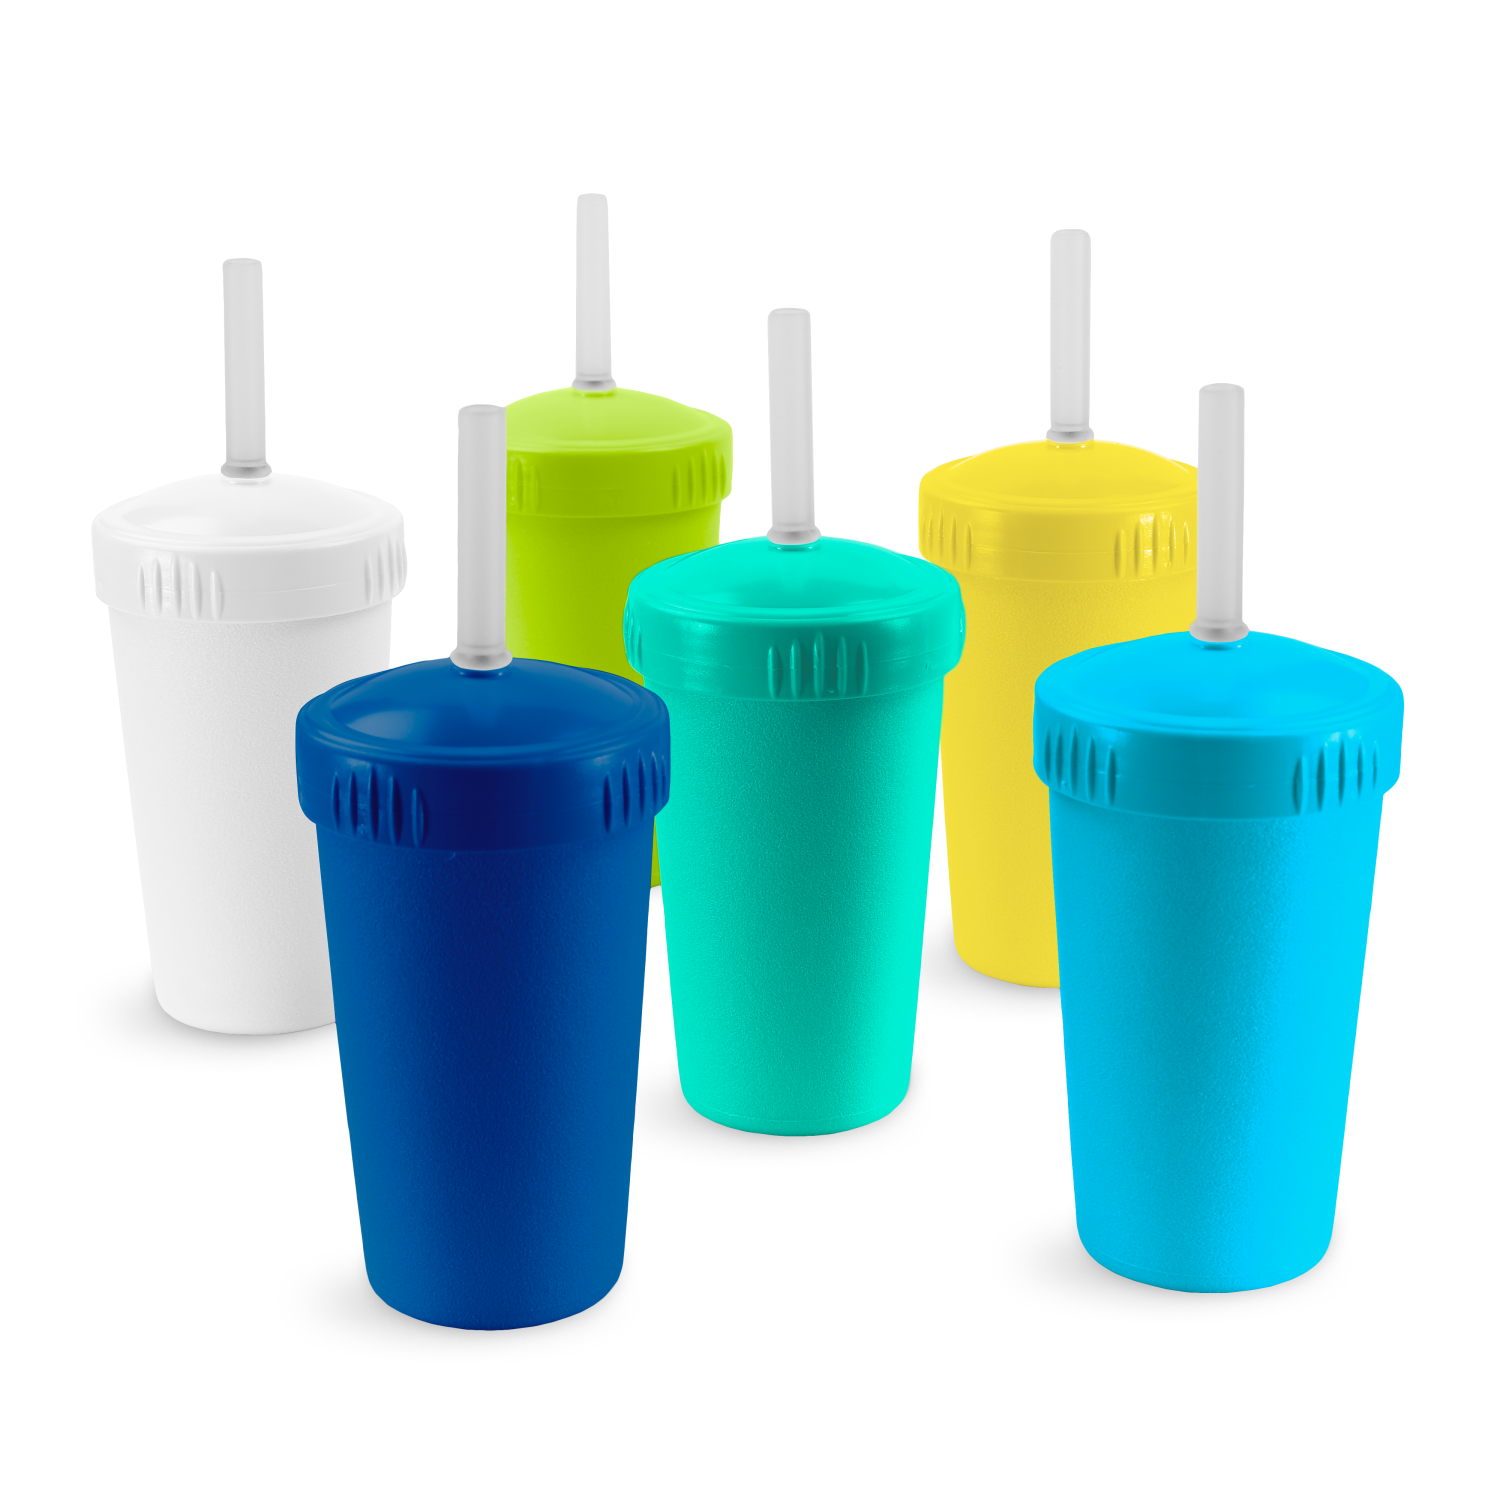 Re Play Made in USA 10 Oz. Sippy Cups for Toddlers, Pack of 6 - Reusable  Spill Proof Cups for Kids, …See more Re Play Made in USA 10 Oz. Sippy Cups